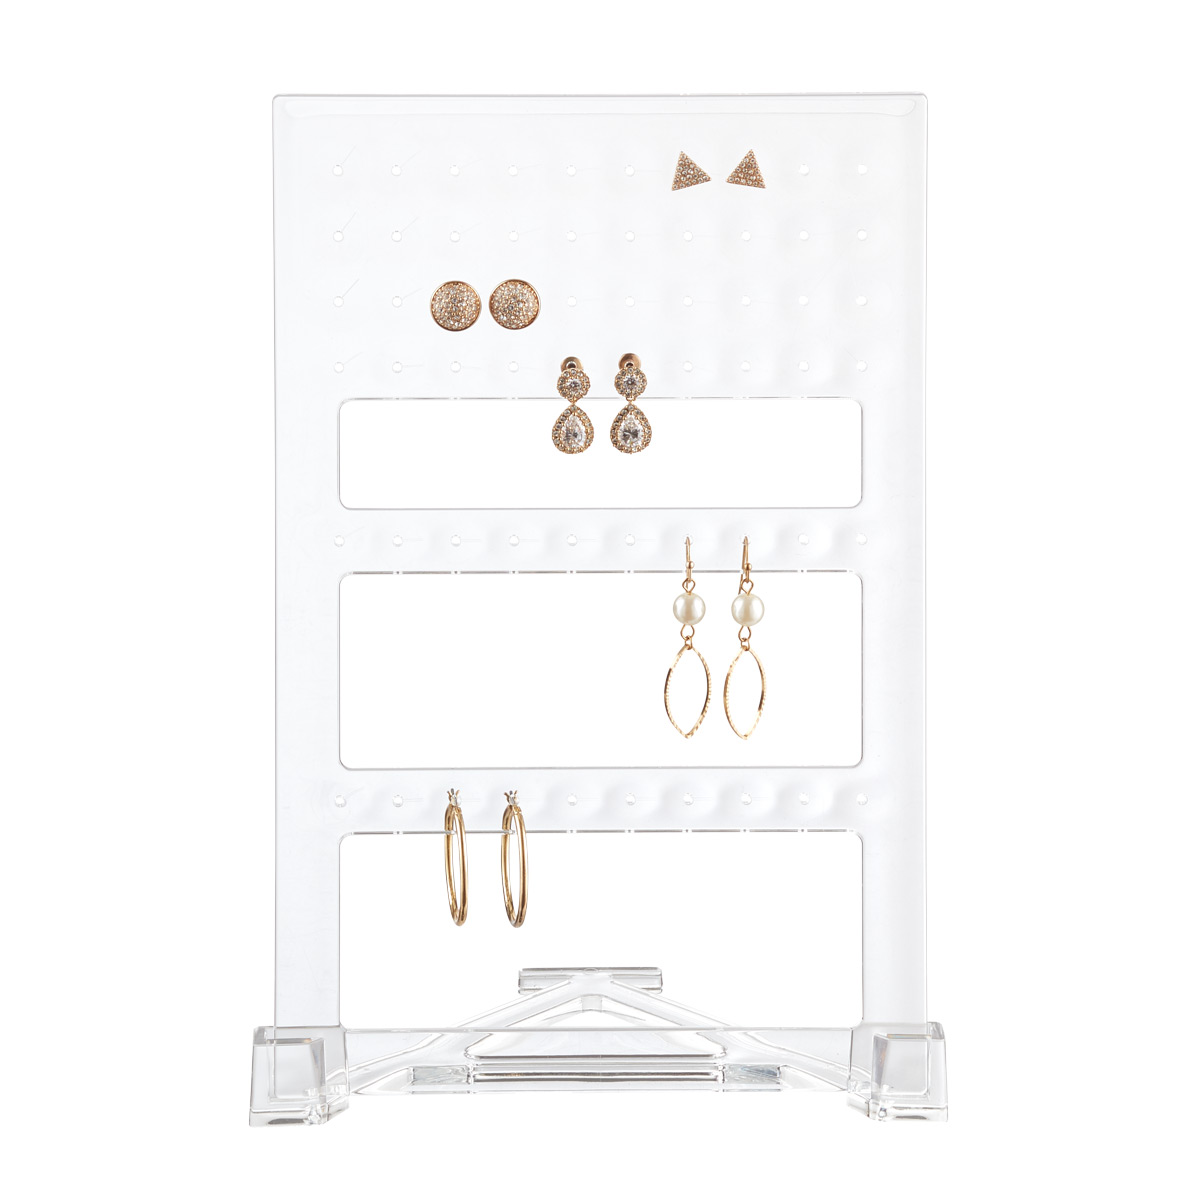 Acrylic Jewelry Organizer BoxClear Earring Holder for Necklaces Rings Earrings  Display StandGift for WomenGirls  Amazonin Jewellery